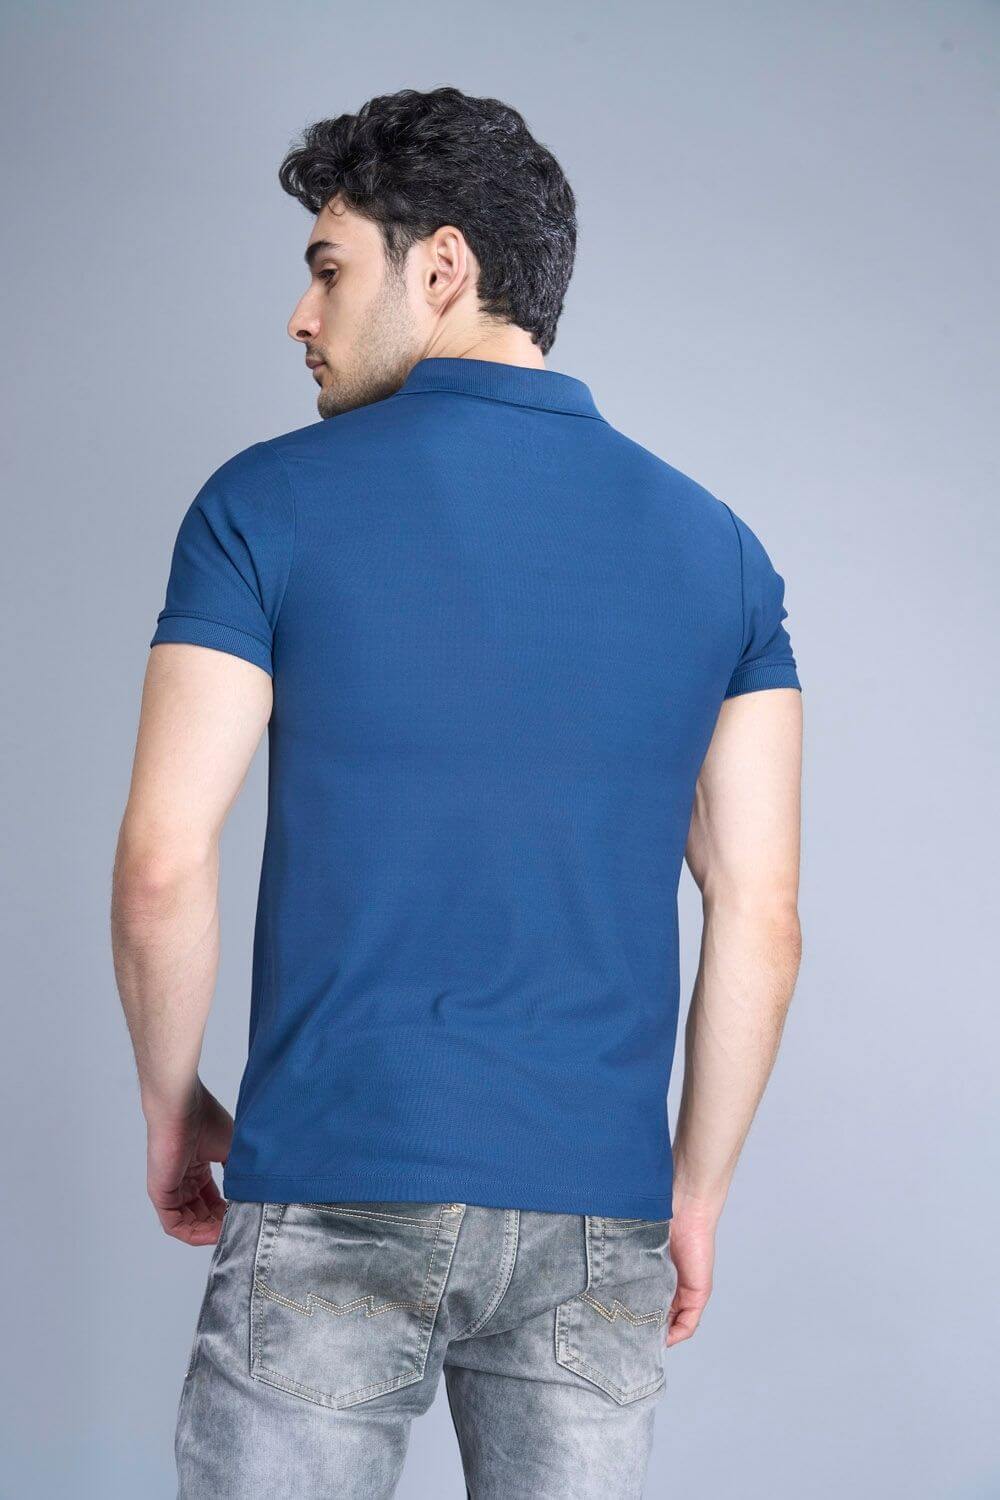 Teal Navy colored, Smart Tech Polo T-shirts for men with collar and half sleeves, back view.